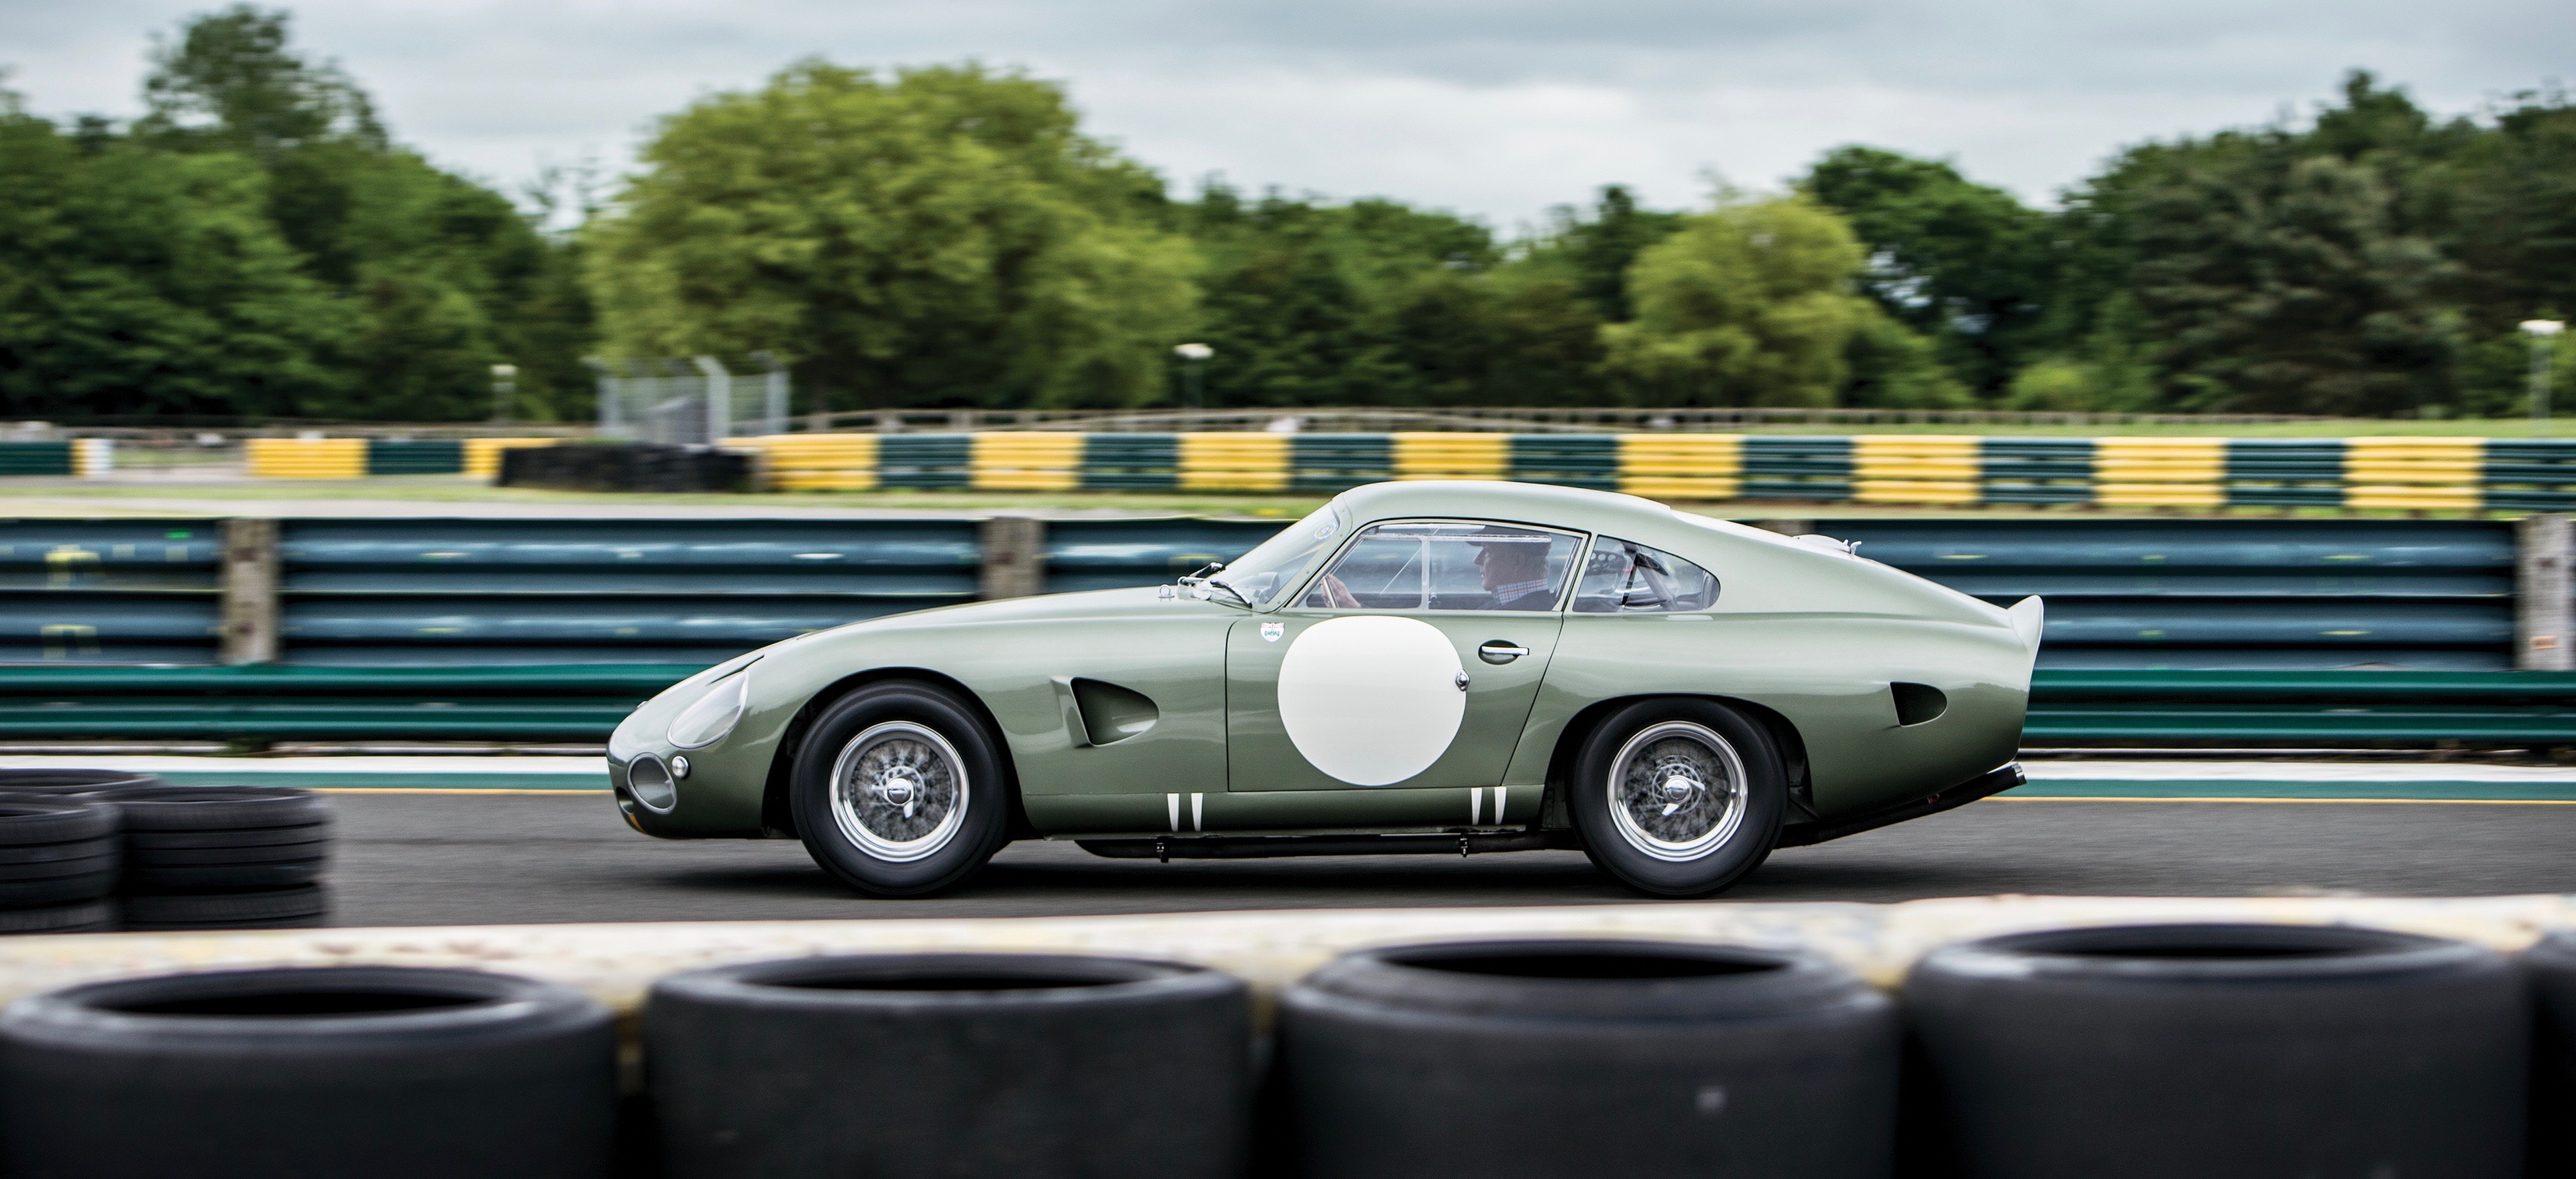 Monterey auctions, Record-breaking 1963 Aston Martin Le Mans racer joins RM Sotheby’s Monterey docket, ClassicCars.com Journal